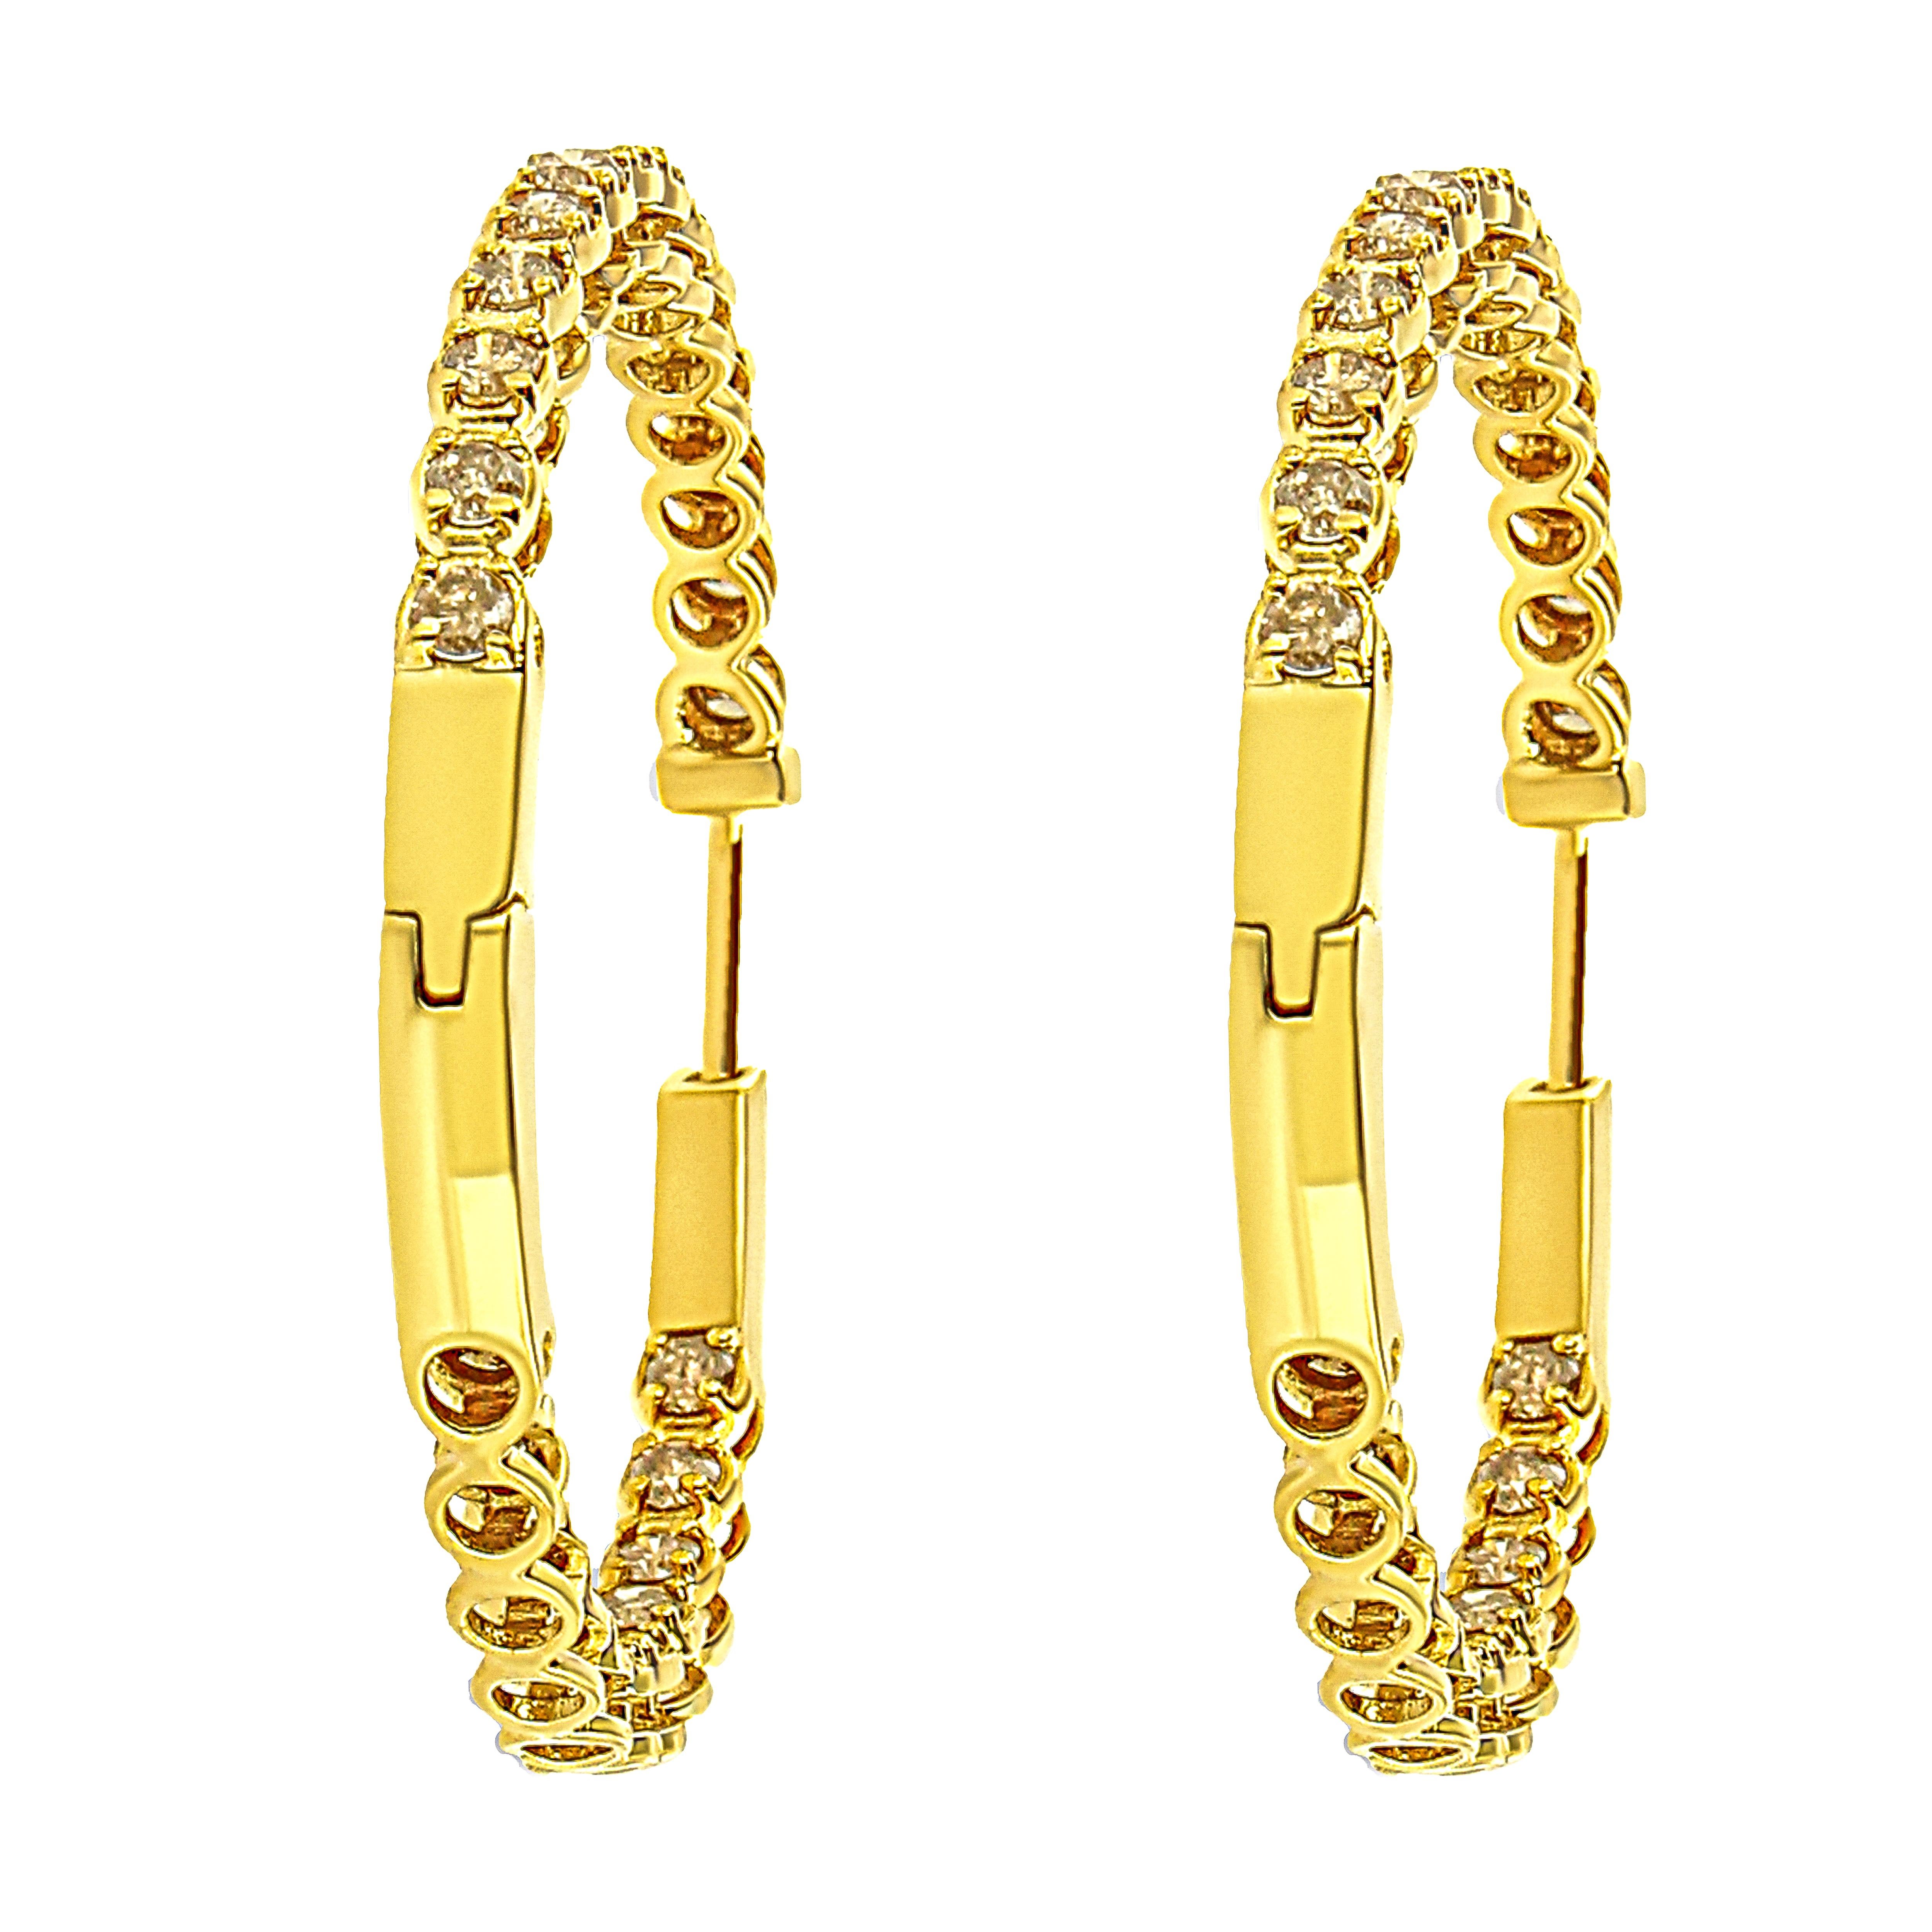 Treat yourself to luxury with these dazzling diamond hoop earrings crafted in 10k gold plated .925 sterling silver. The earring is captivatingly embellished with 50 bright, round-cut 3.00 Cttw diamonds set along the outside upper front and inside